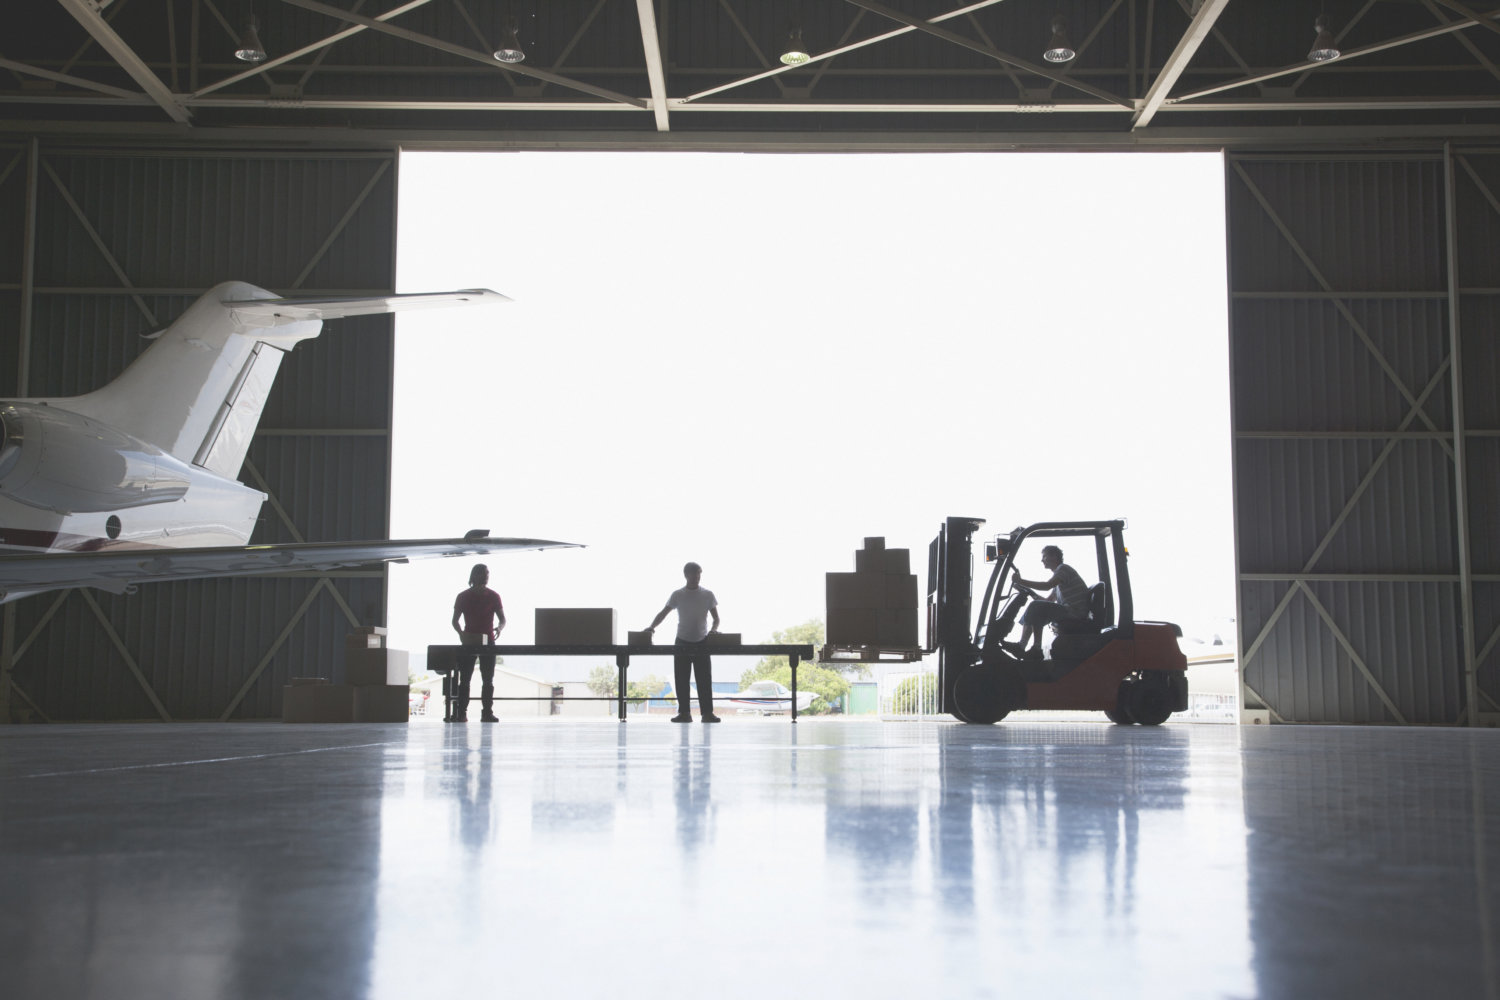 Workers, boxes and forklift in hangar